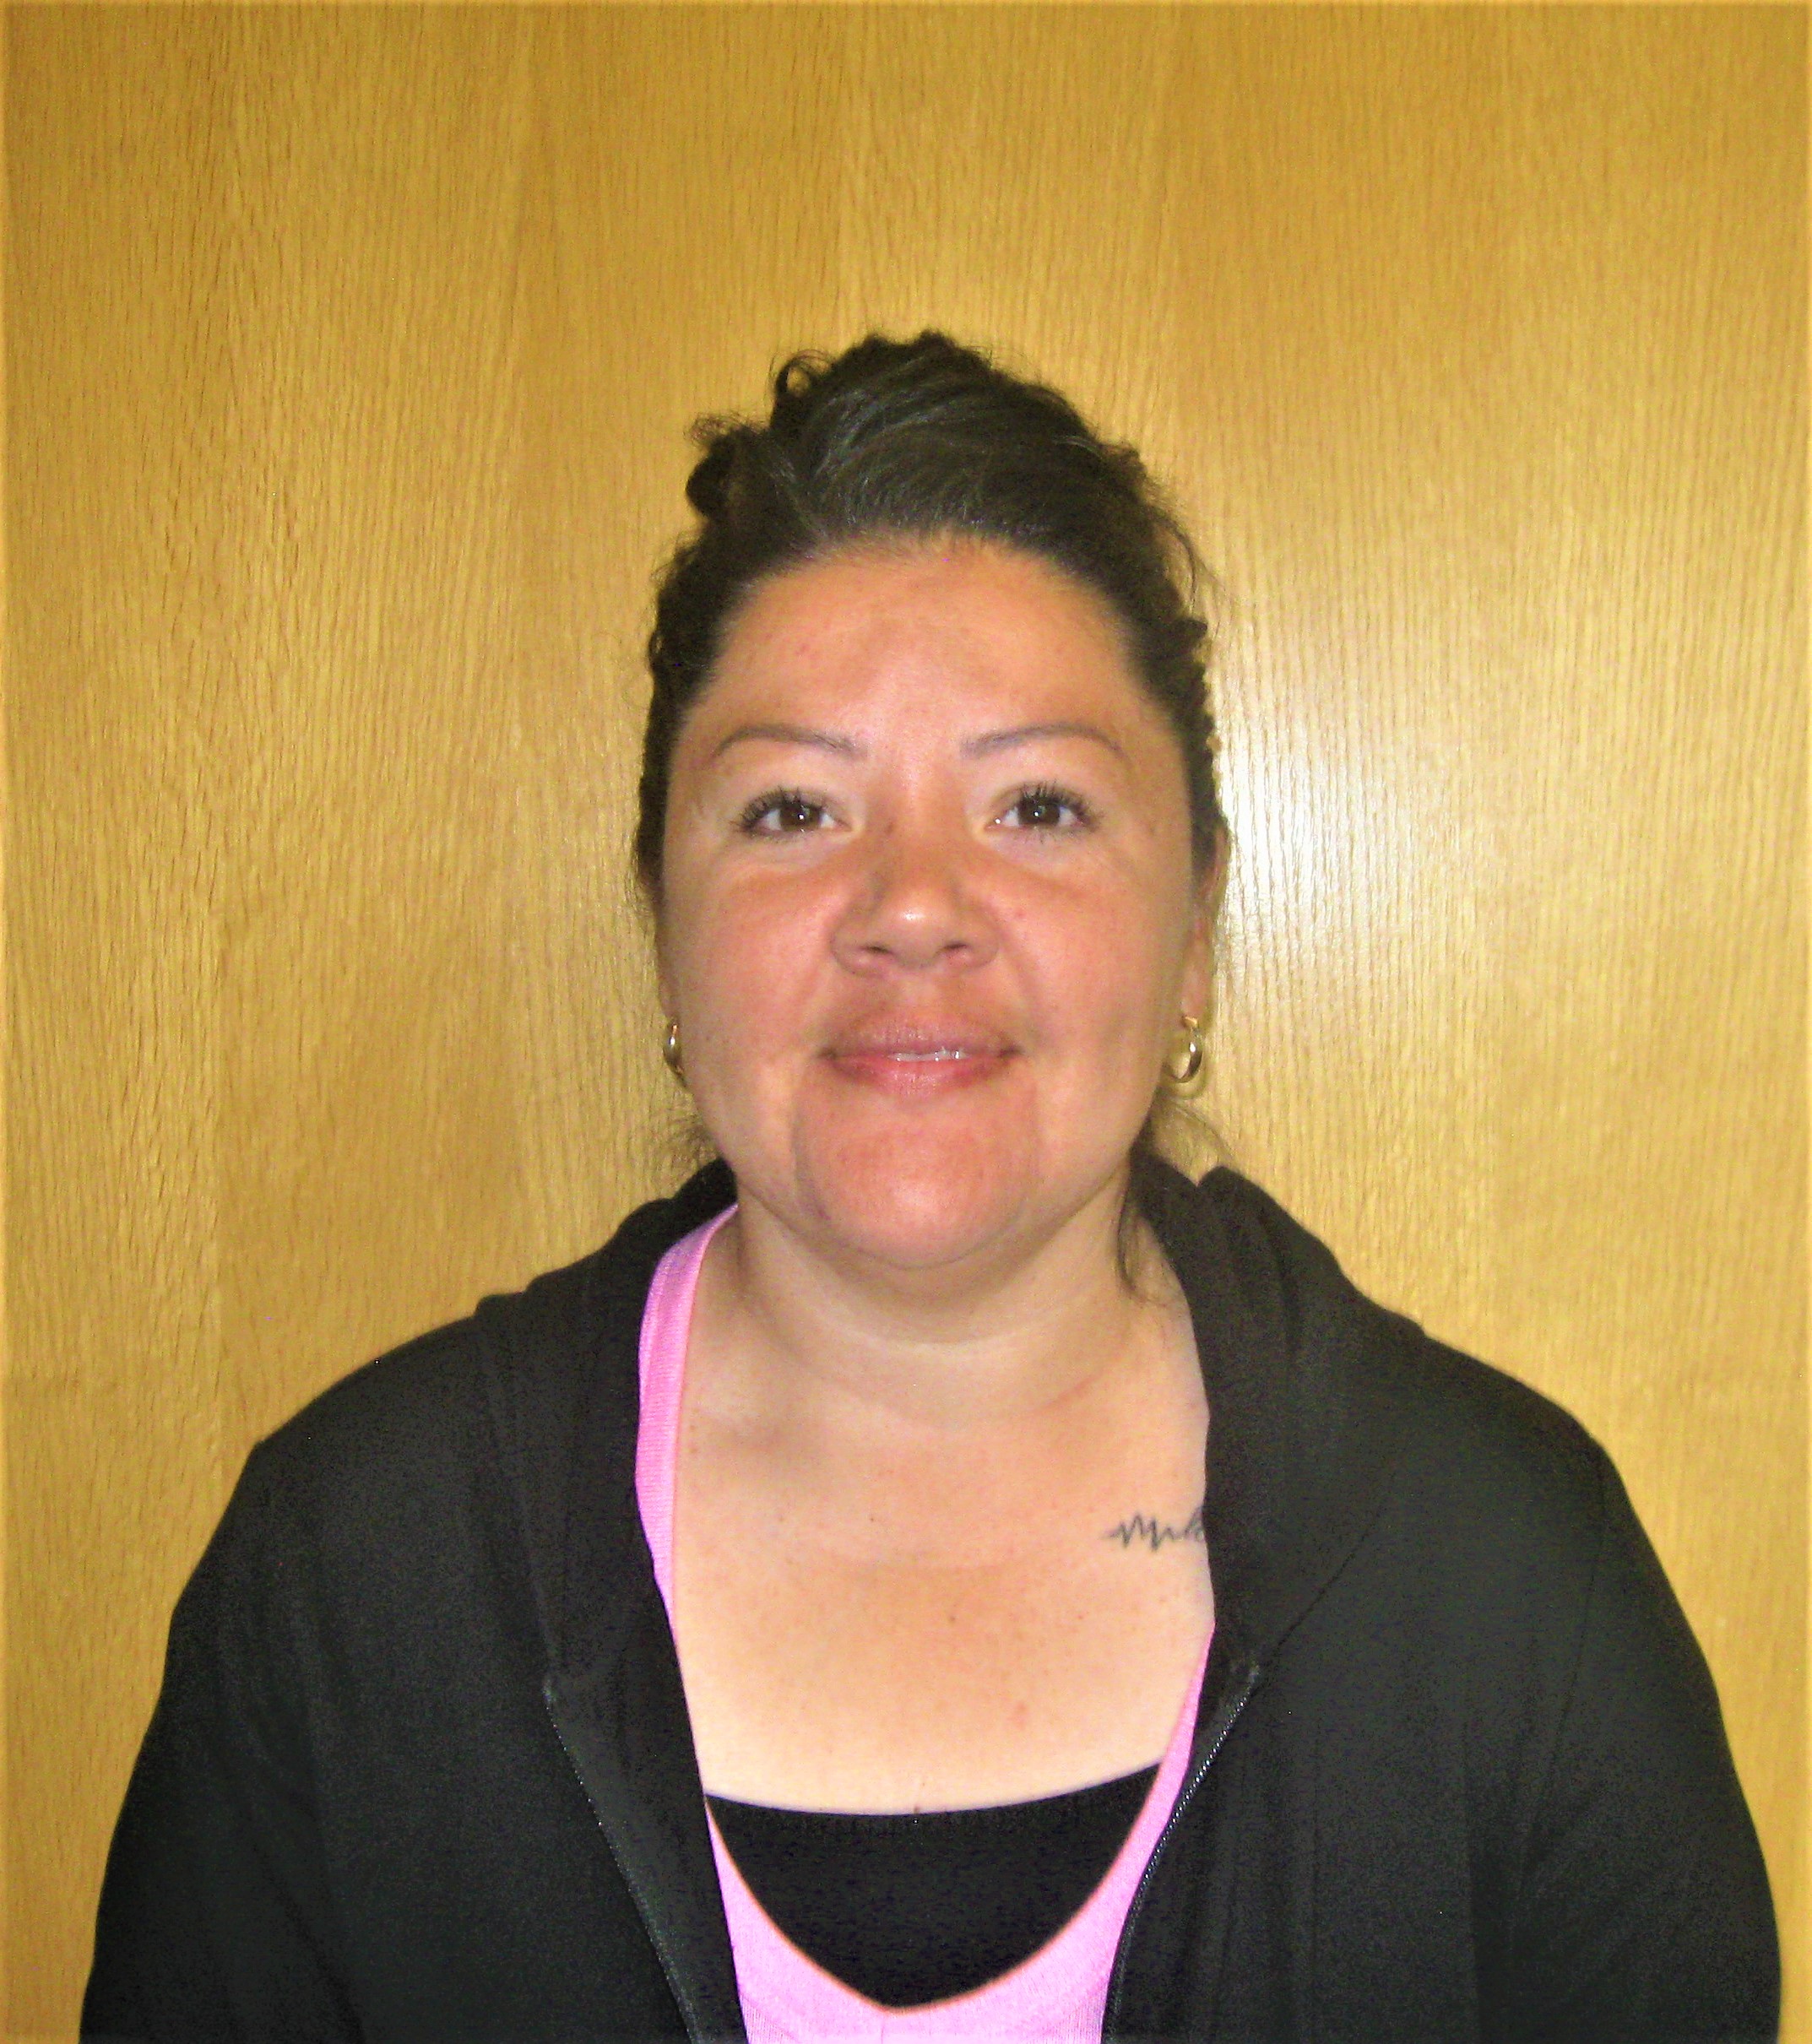 Home Instead Caregiver of the Month Francisca